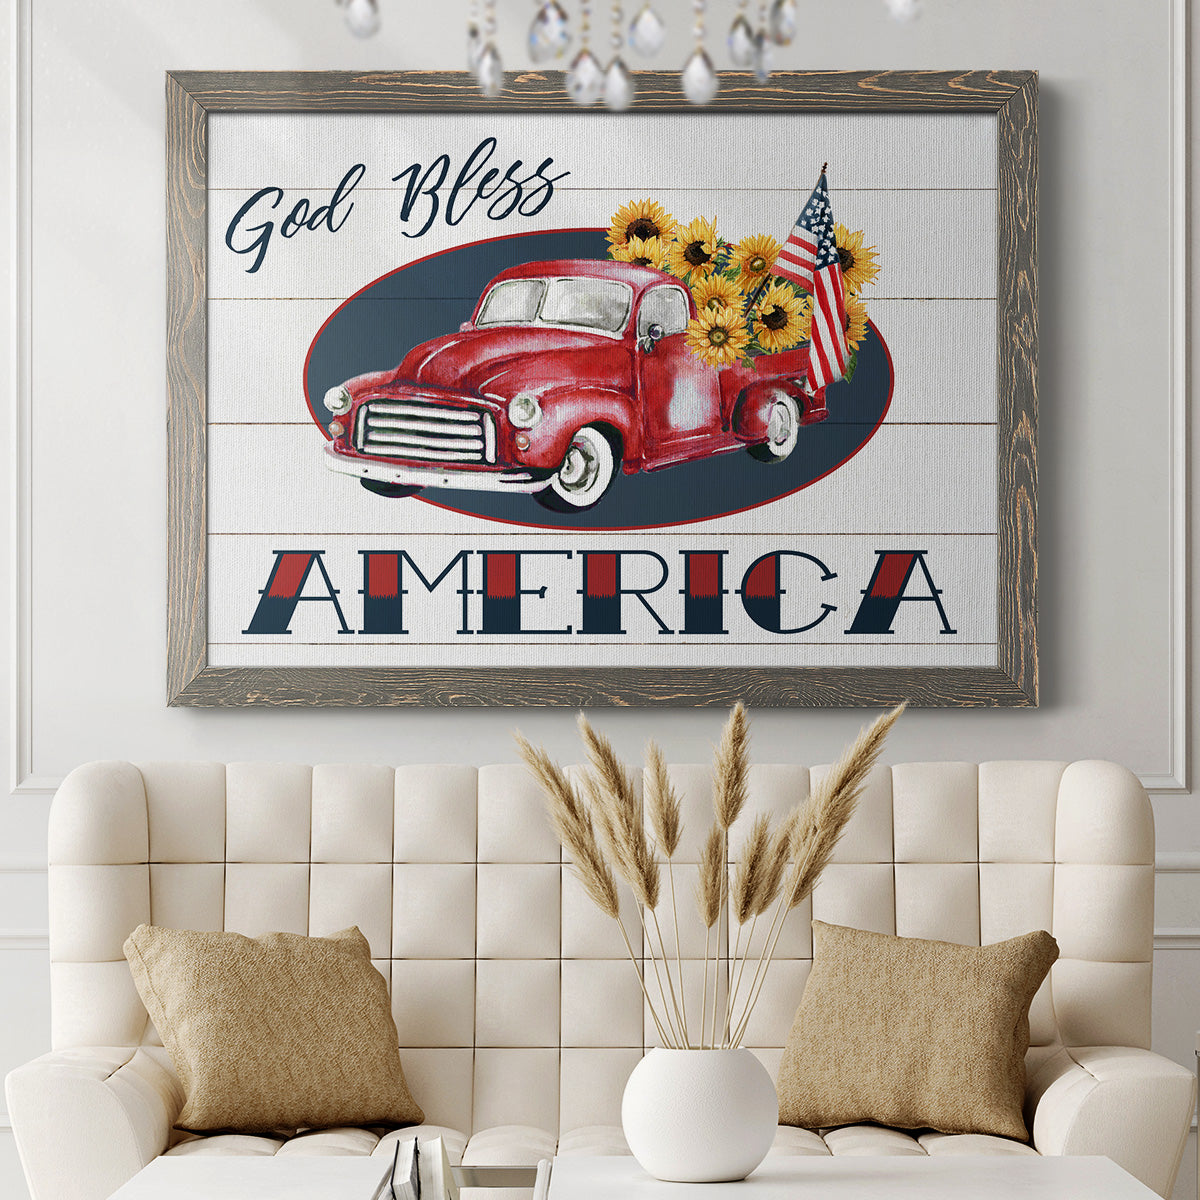 God Bless America Truck-Premium Framed Canvas - Ready to Hang